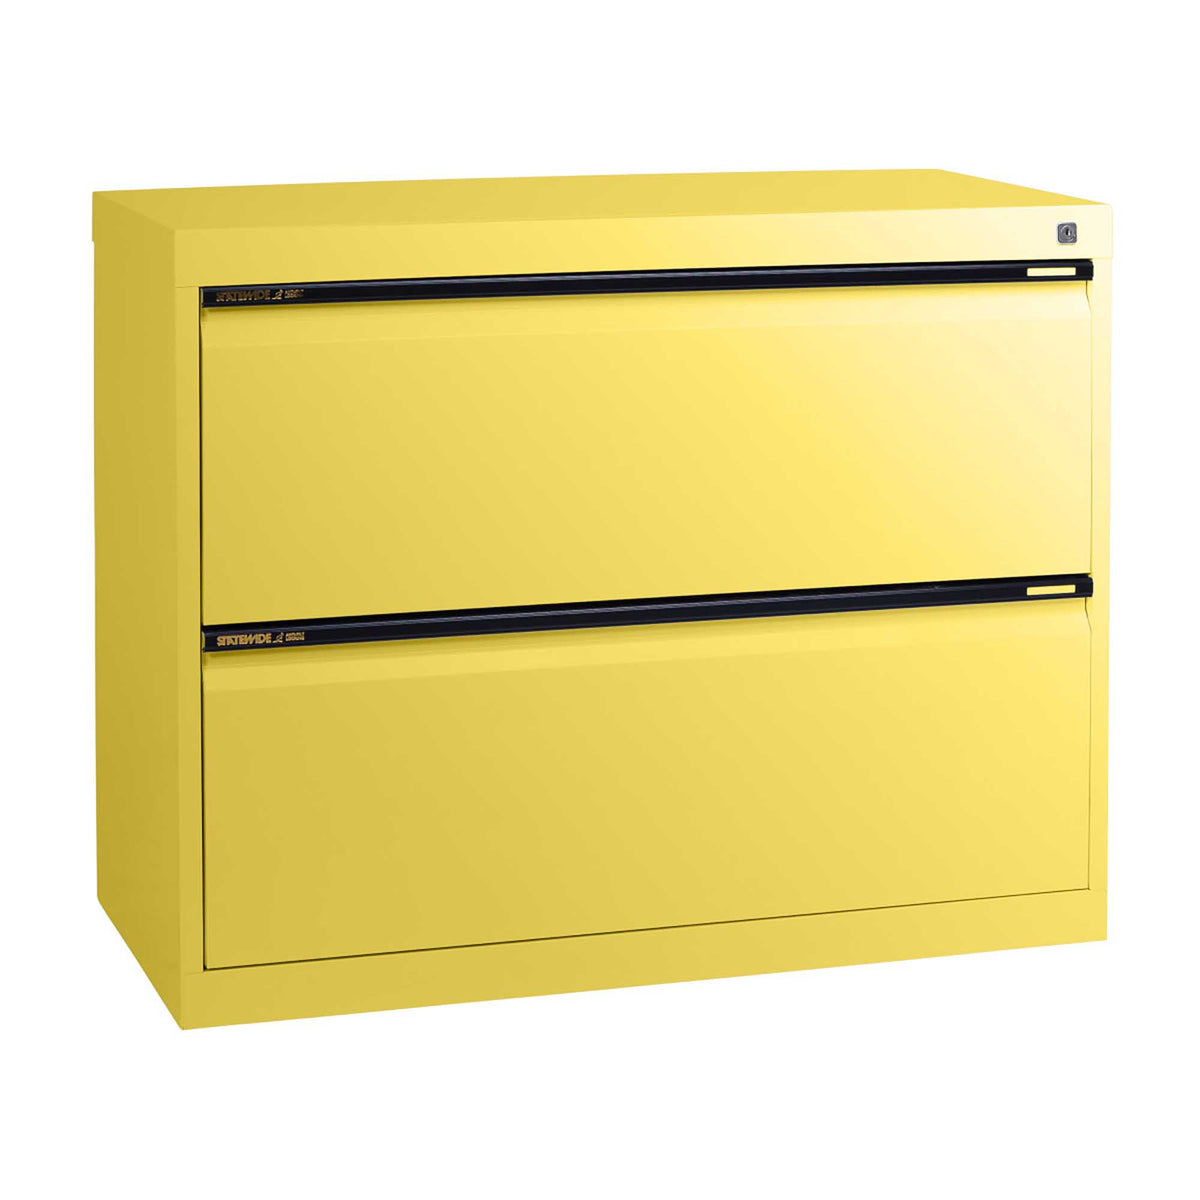 Statewide 2 Drawer Lateral Filing Cabinet